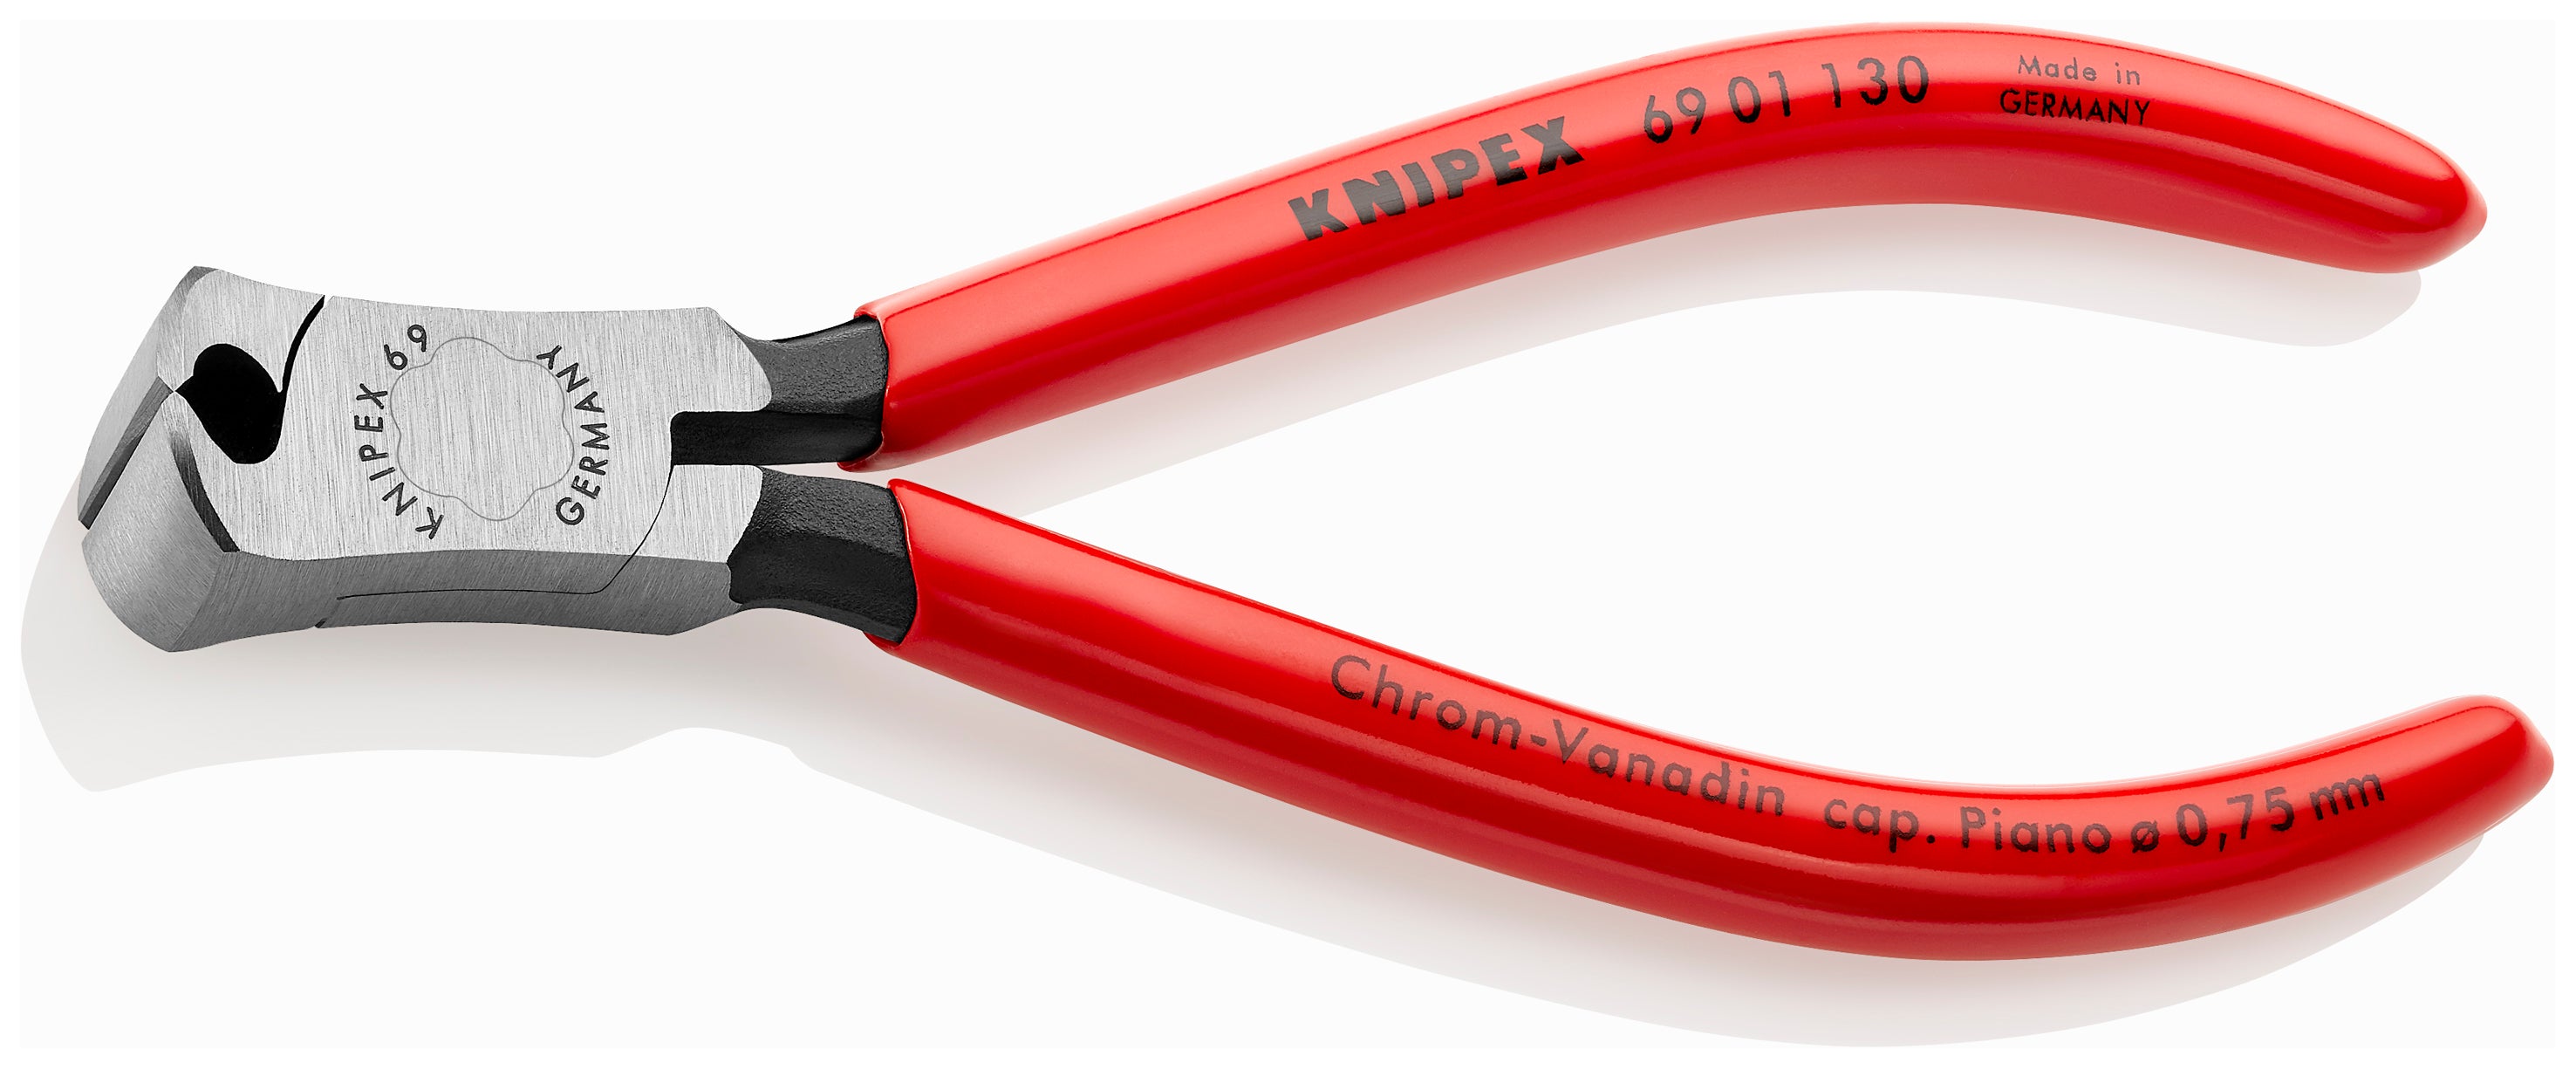 Knipex 6901130-5 1/4" End Cutting Nippers